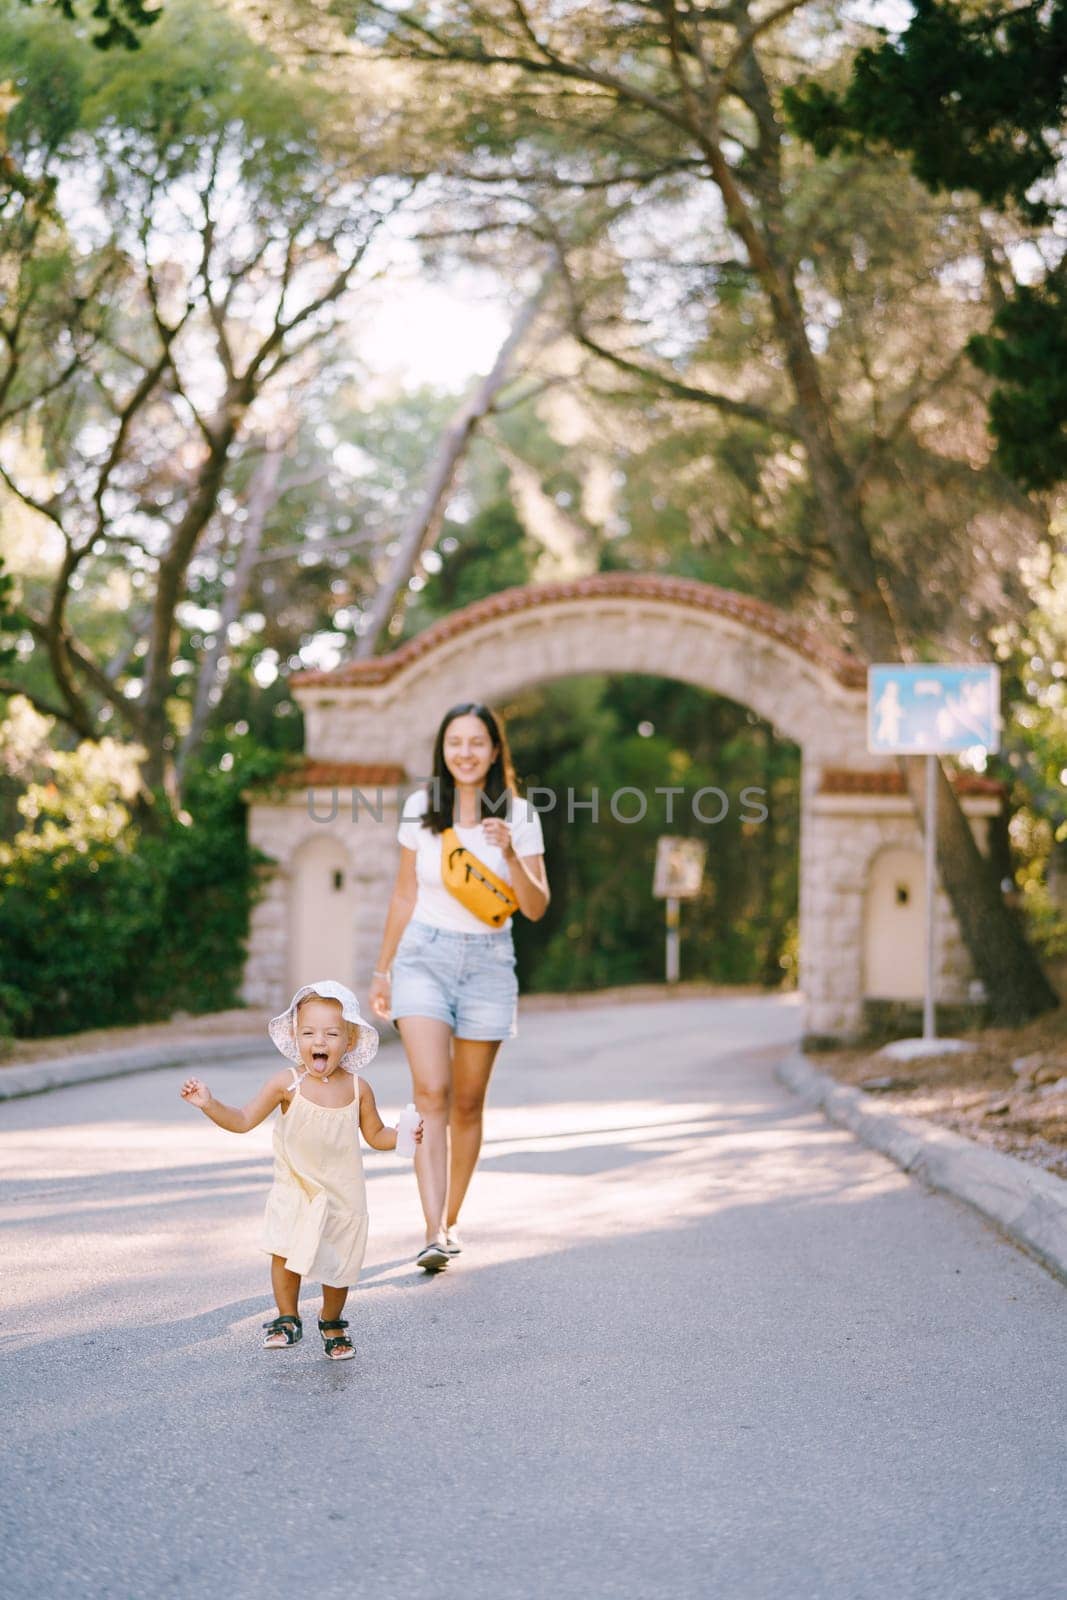 Smiling mother follows a little girl running down the road with her tongue hanging out. High quality photo